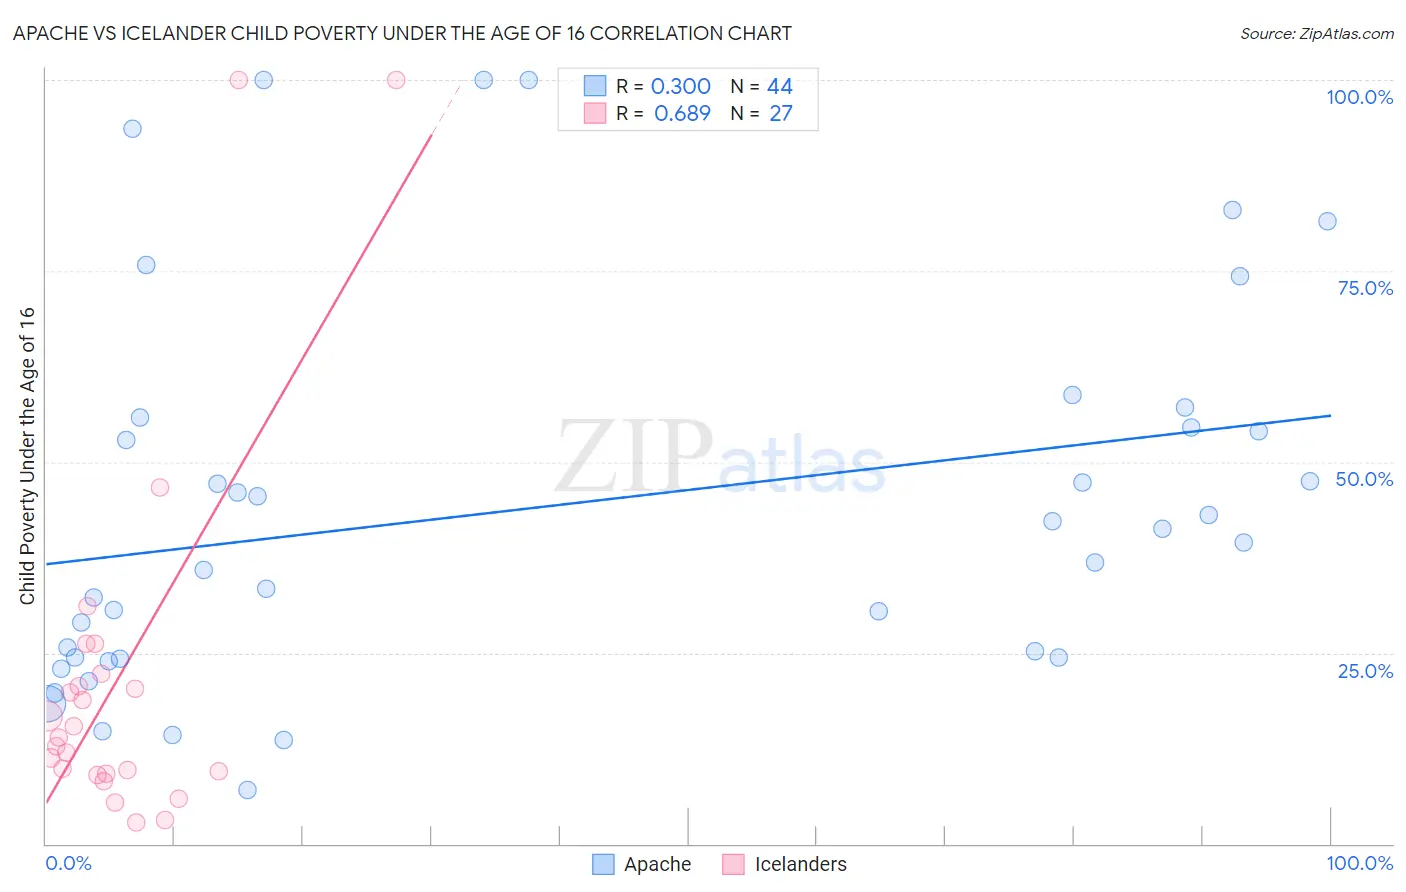 Apache vs Icelander Child Poverty Under the Age of 16